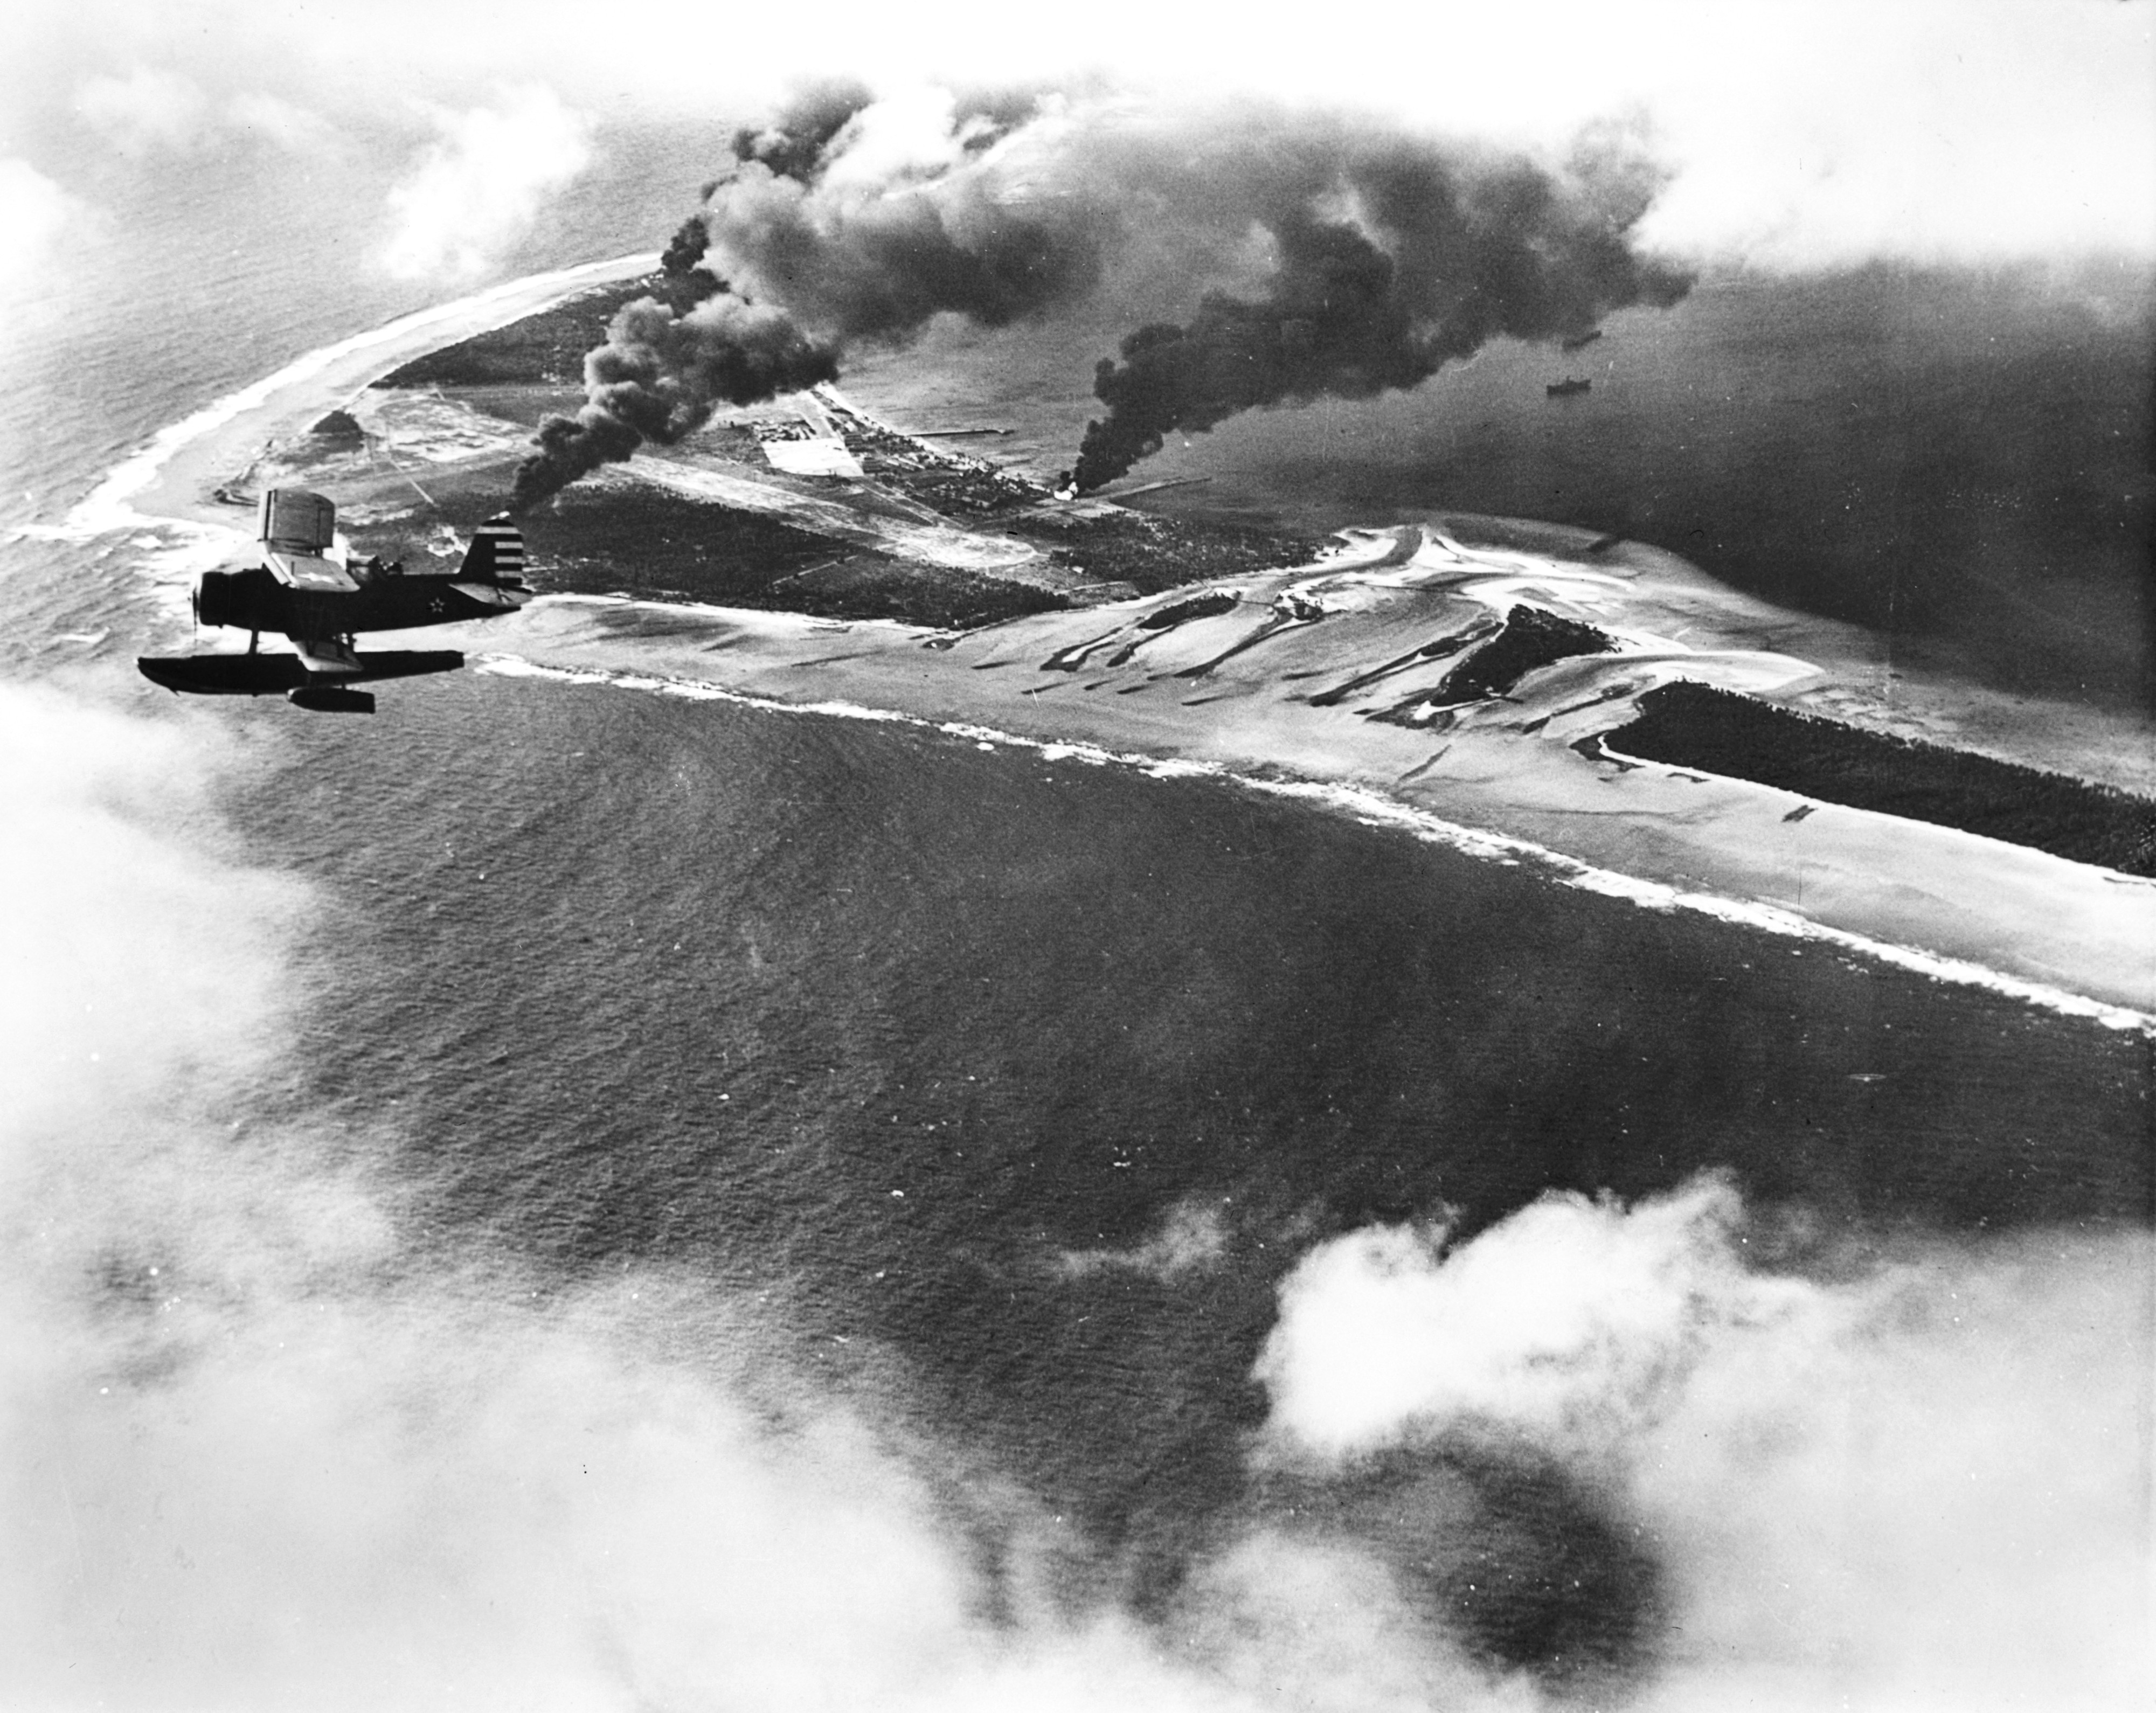 SOC over Wotje atoll, 1 February 1942